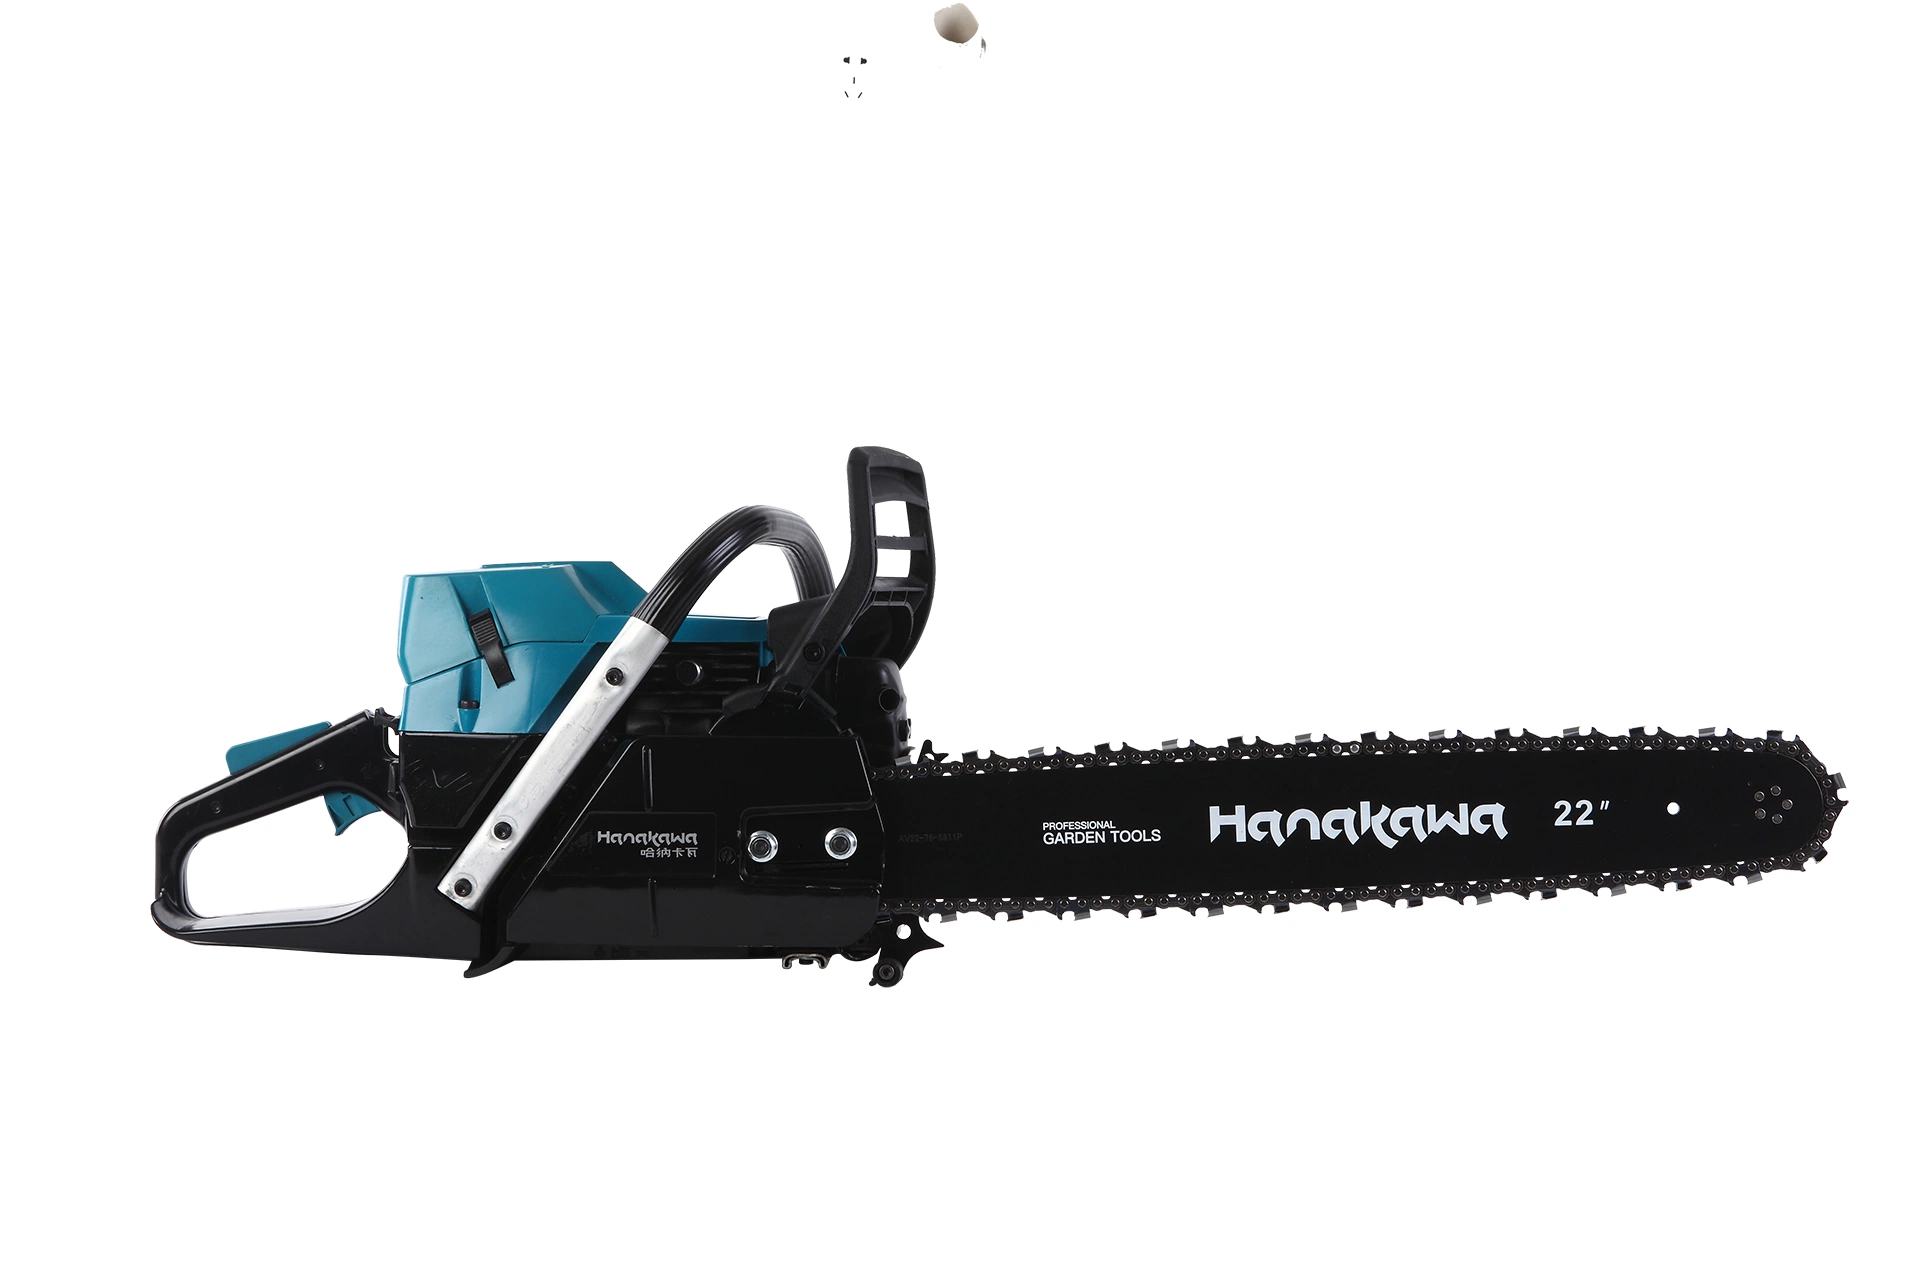 Hanakawa H871 (372XP) 70.7cc 22inch Power Chain Saw 2-Cycle Handed Petrol Chainsaws Gasoline Chain Saws Garden Tool for Cutting Wood Outdoor Home Farm Use